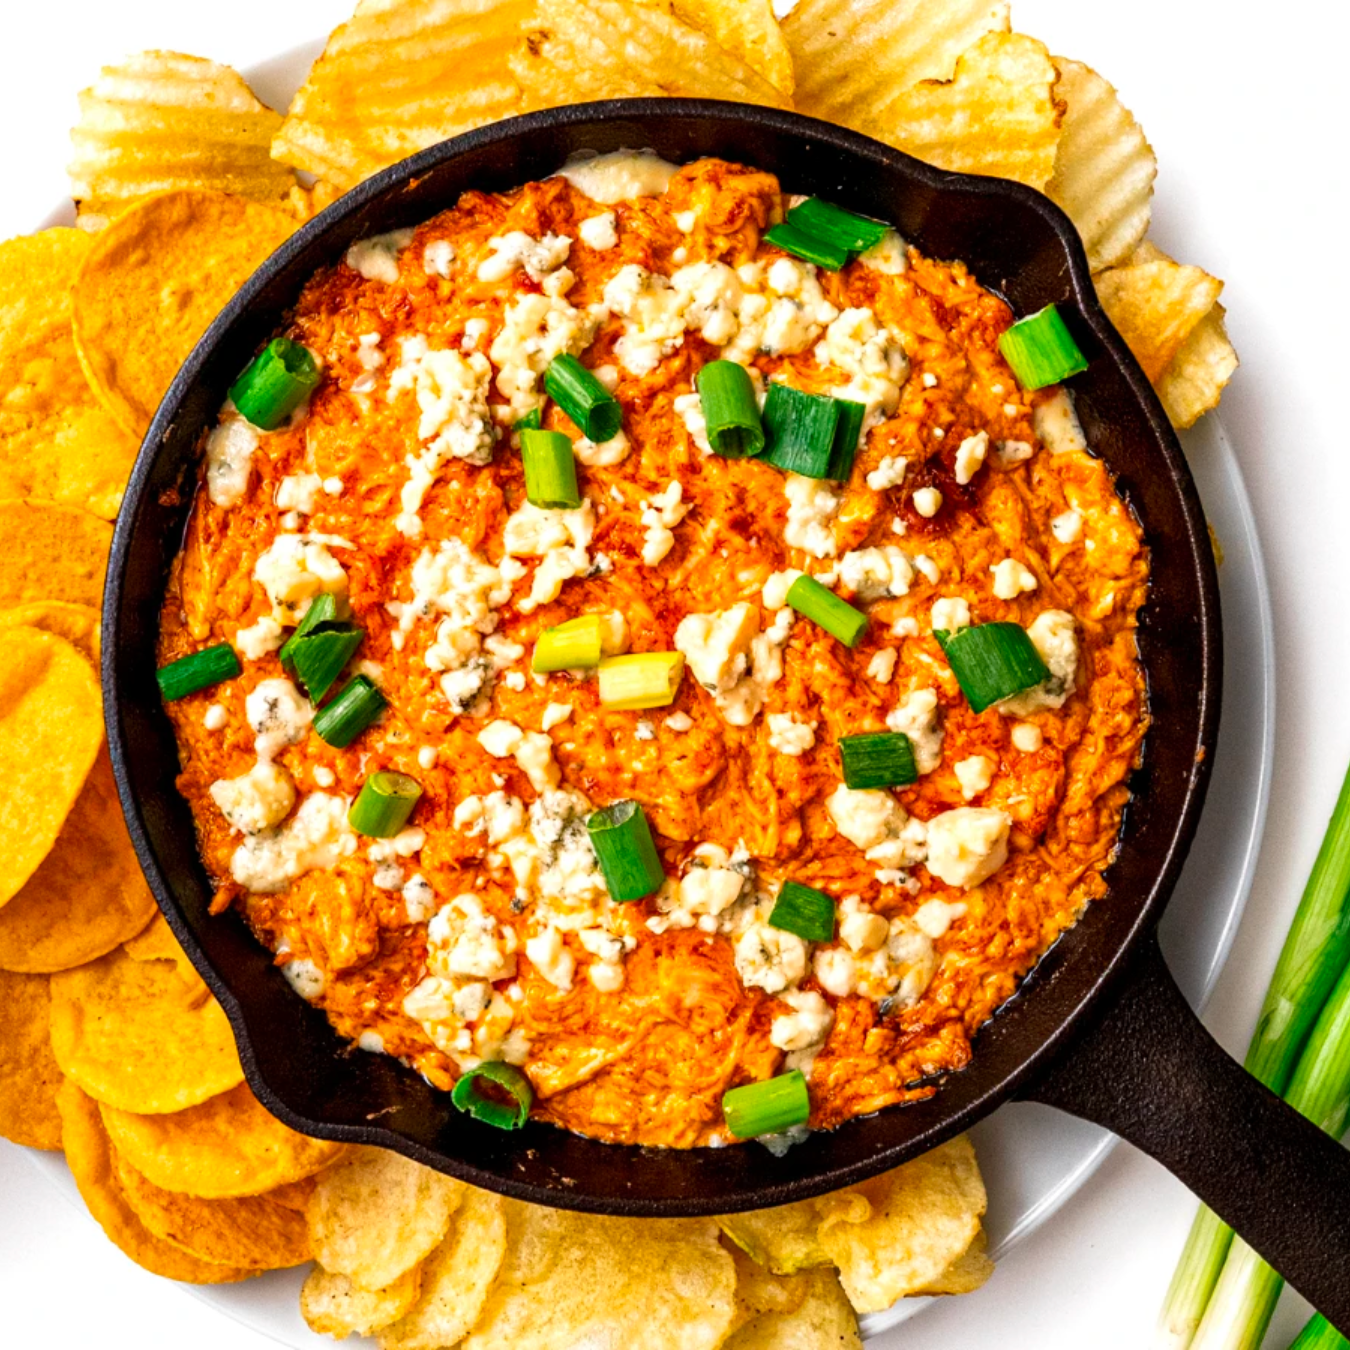 Buffalo Chicken Dip in a cast iron skillet, topped with green onions & blue cheese, with a side of potato chips.